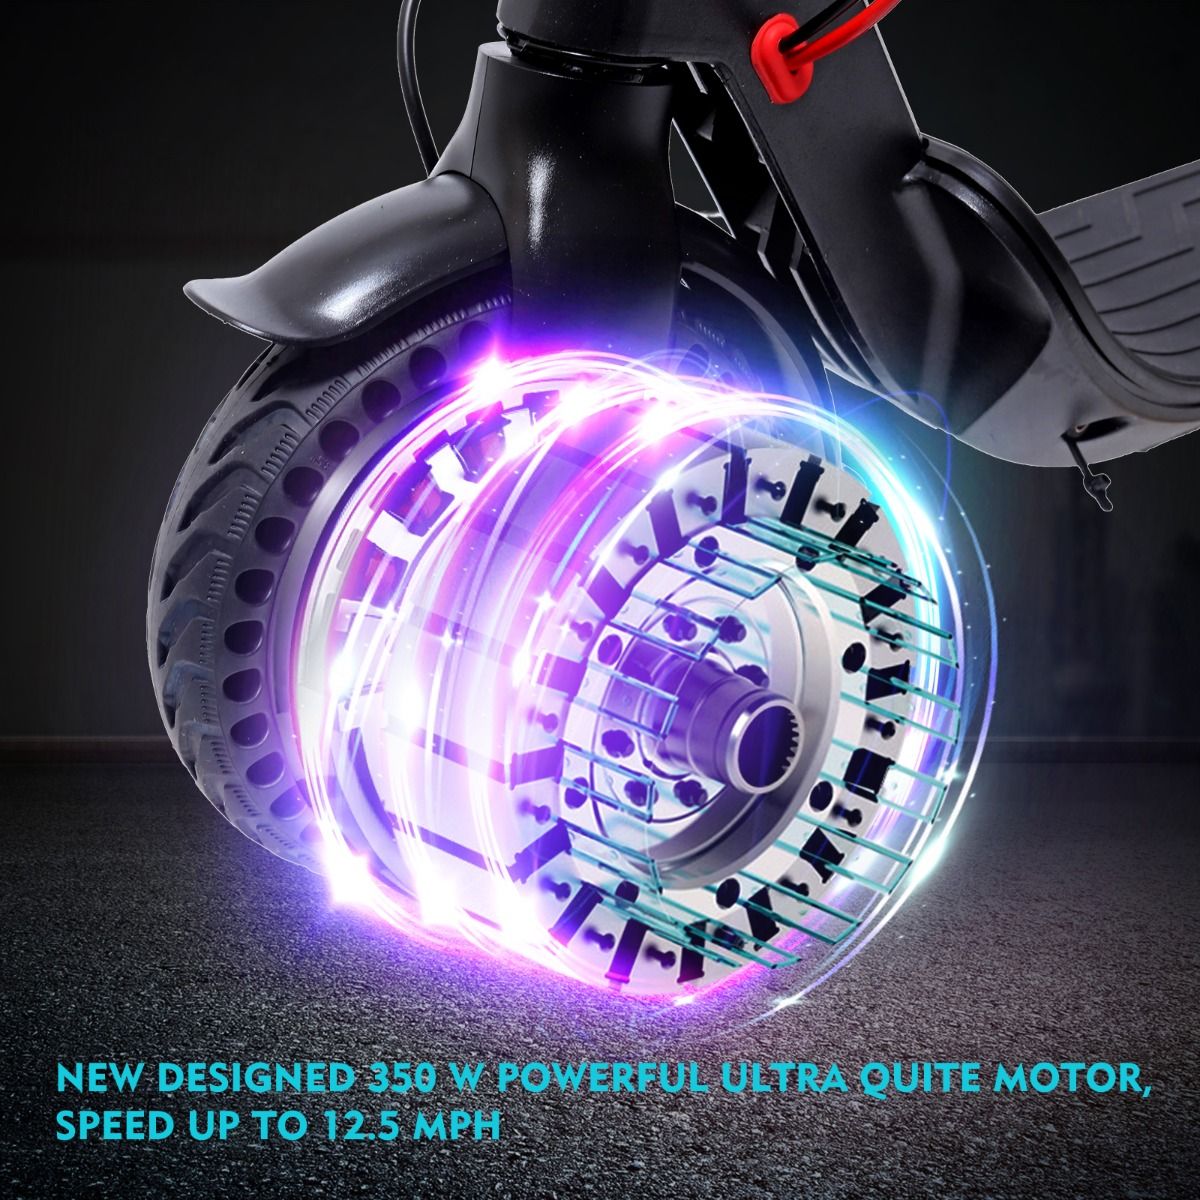 BLACK - Electric Scooter, 350 W Motor, 8.5" tire, 3-speed,  Lightweight , 3 Seconds Easy to Fold & Carry, Super Bright LED Light, Long Range. Perfect for teens and adults